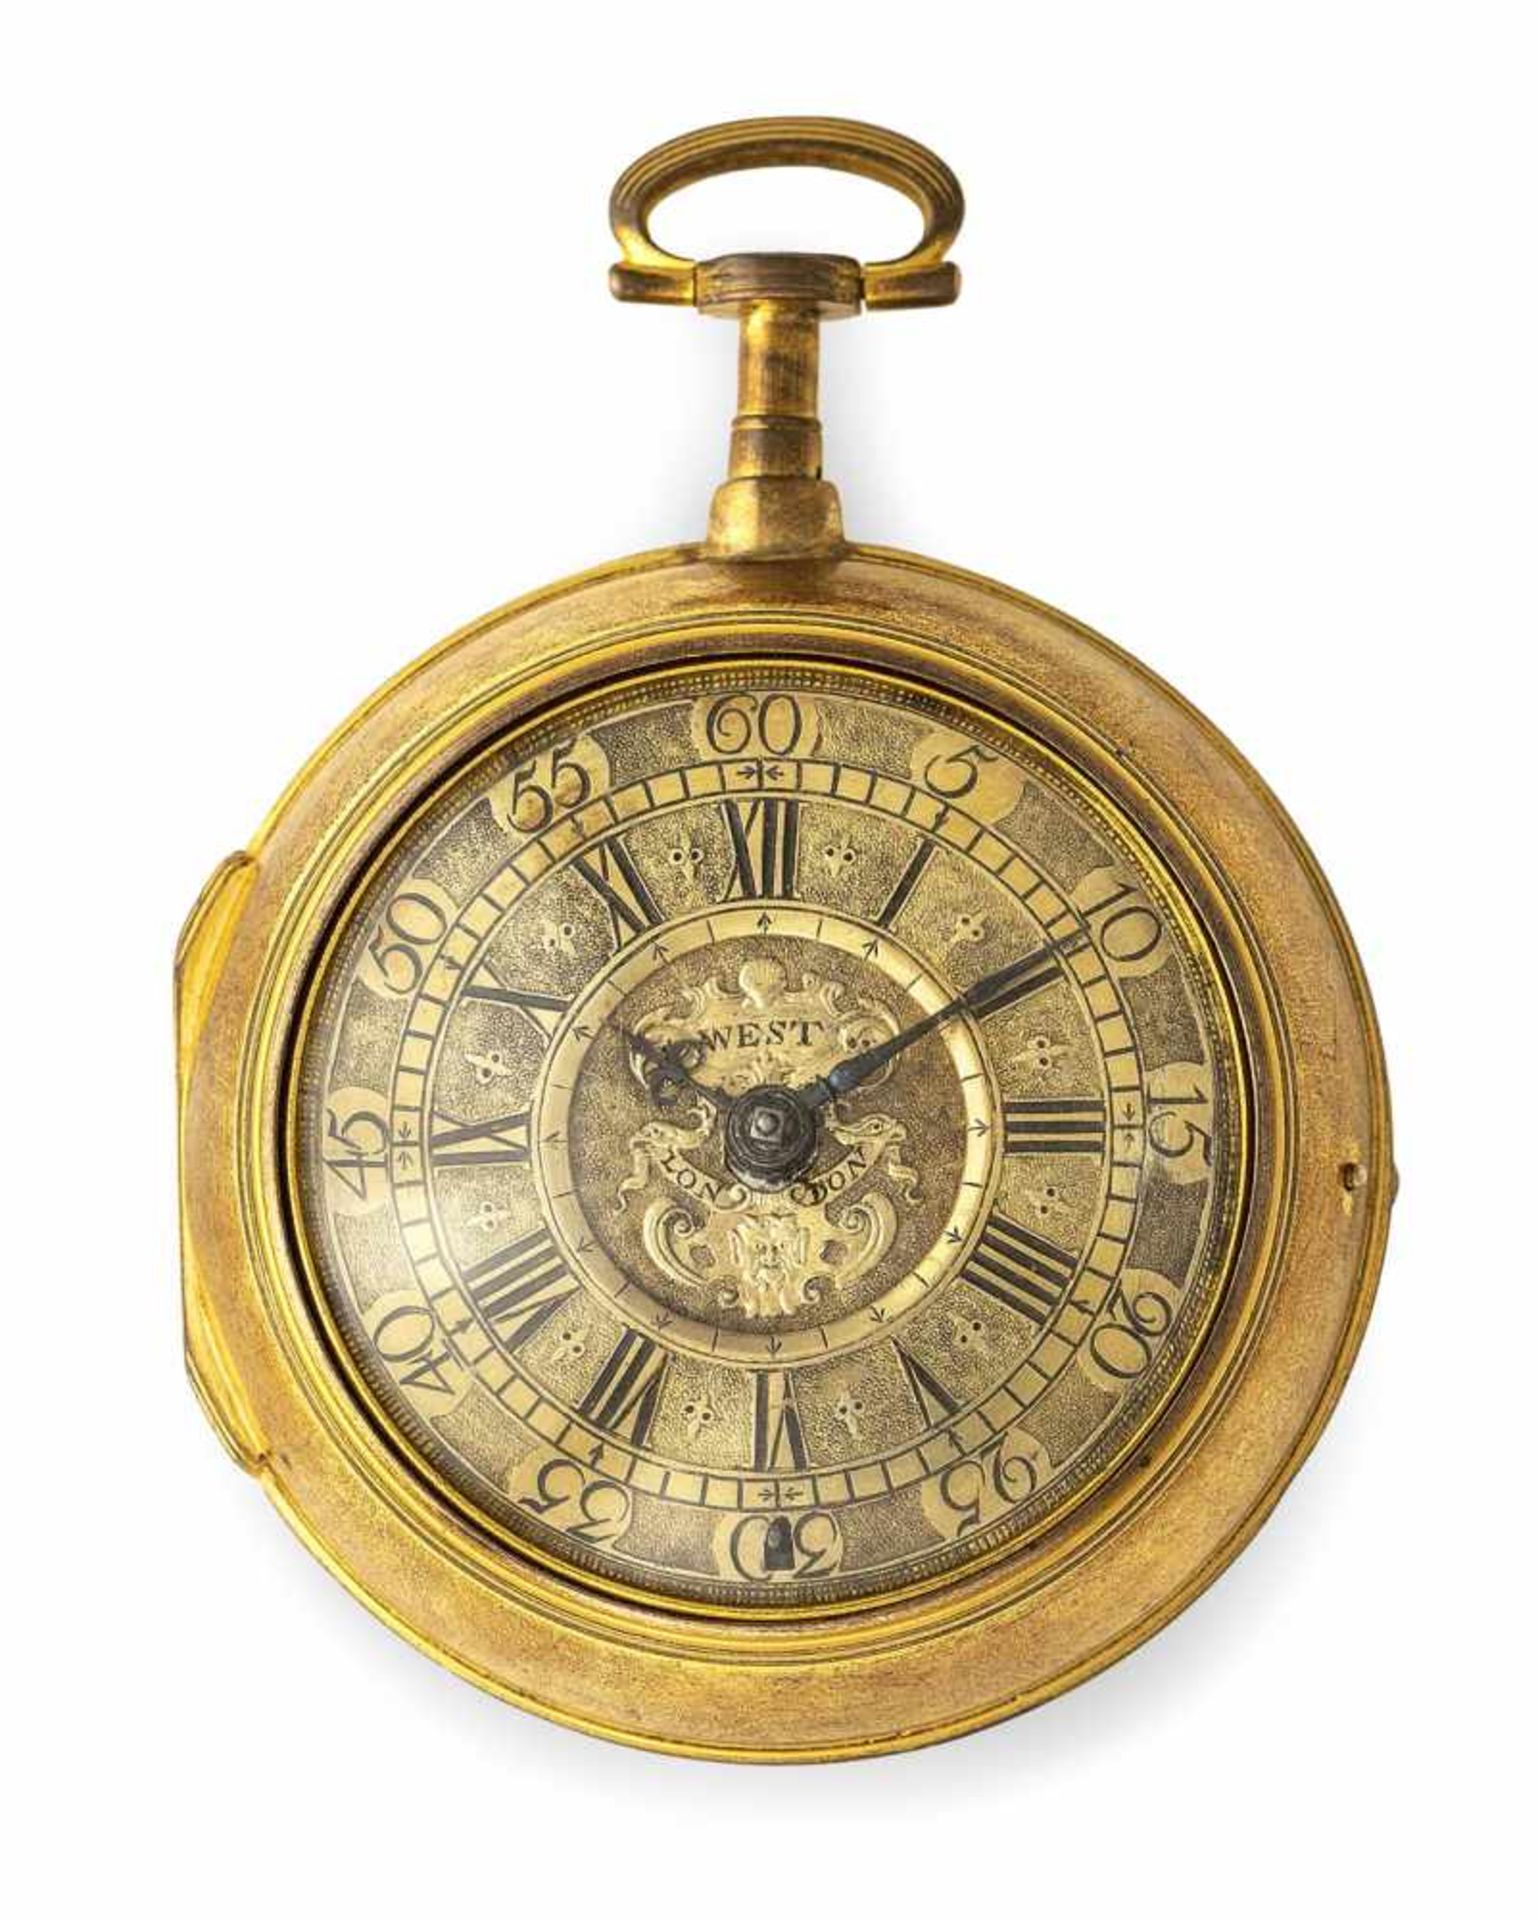 A large gilt pocket watch in a double case, signed Tho West London 913, c. 1700. Signed on